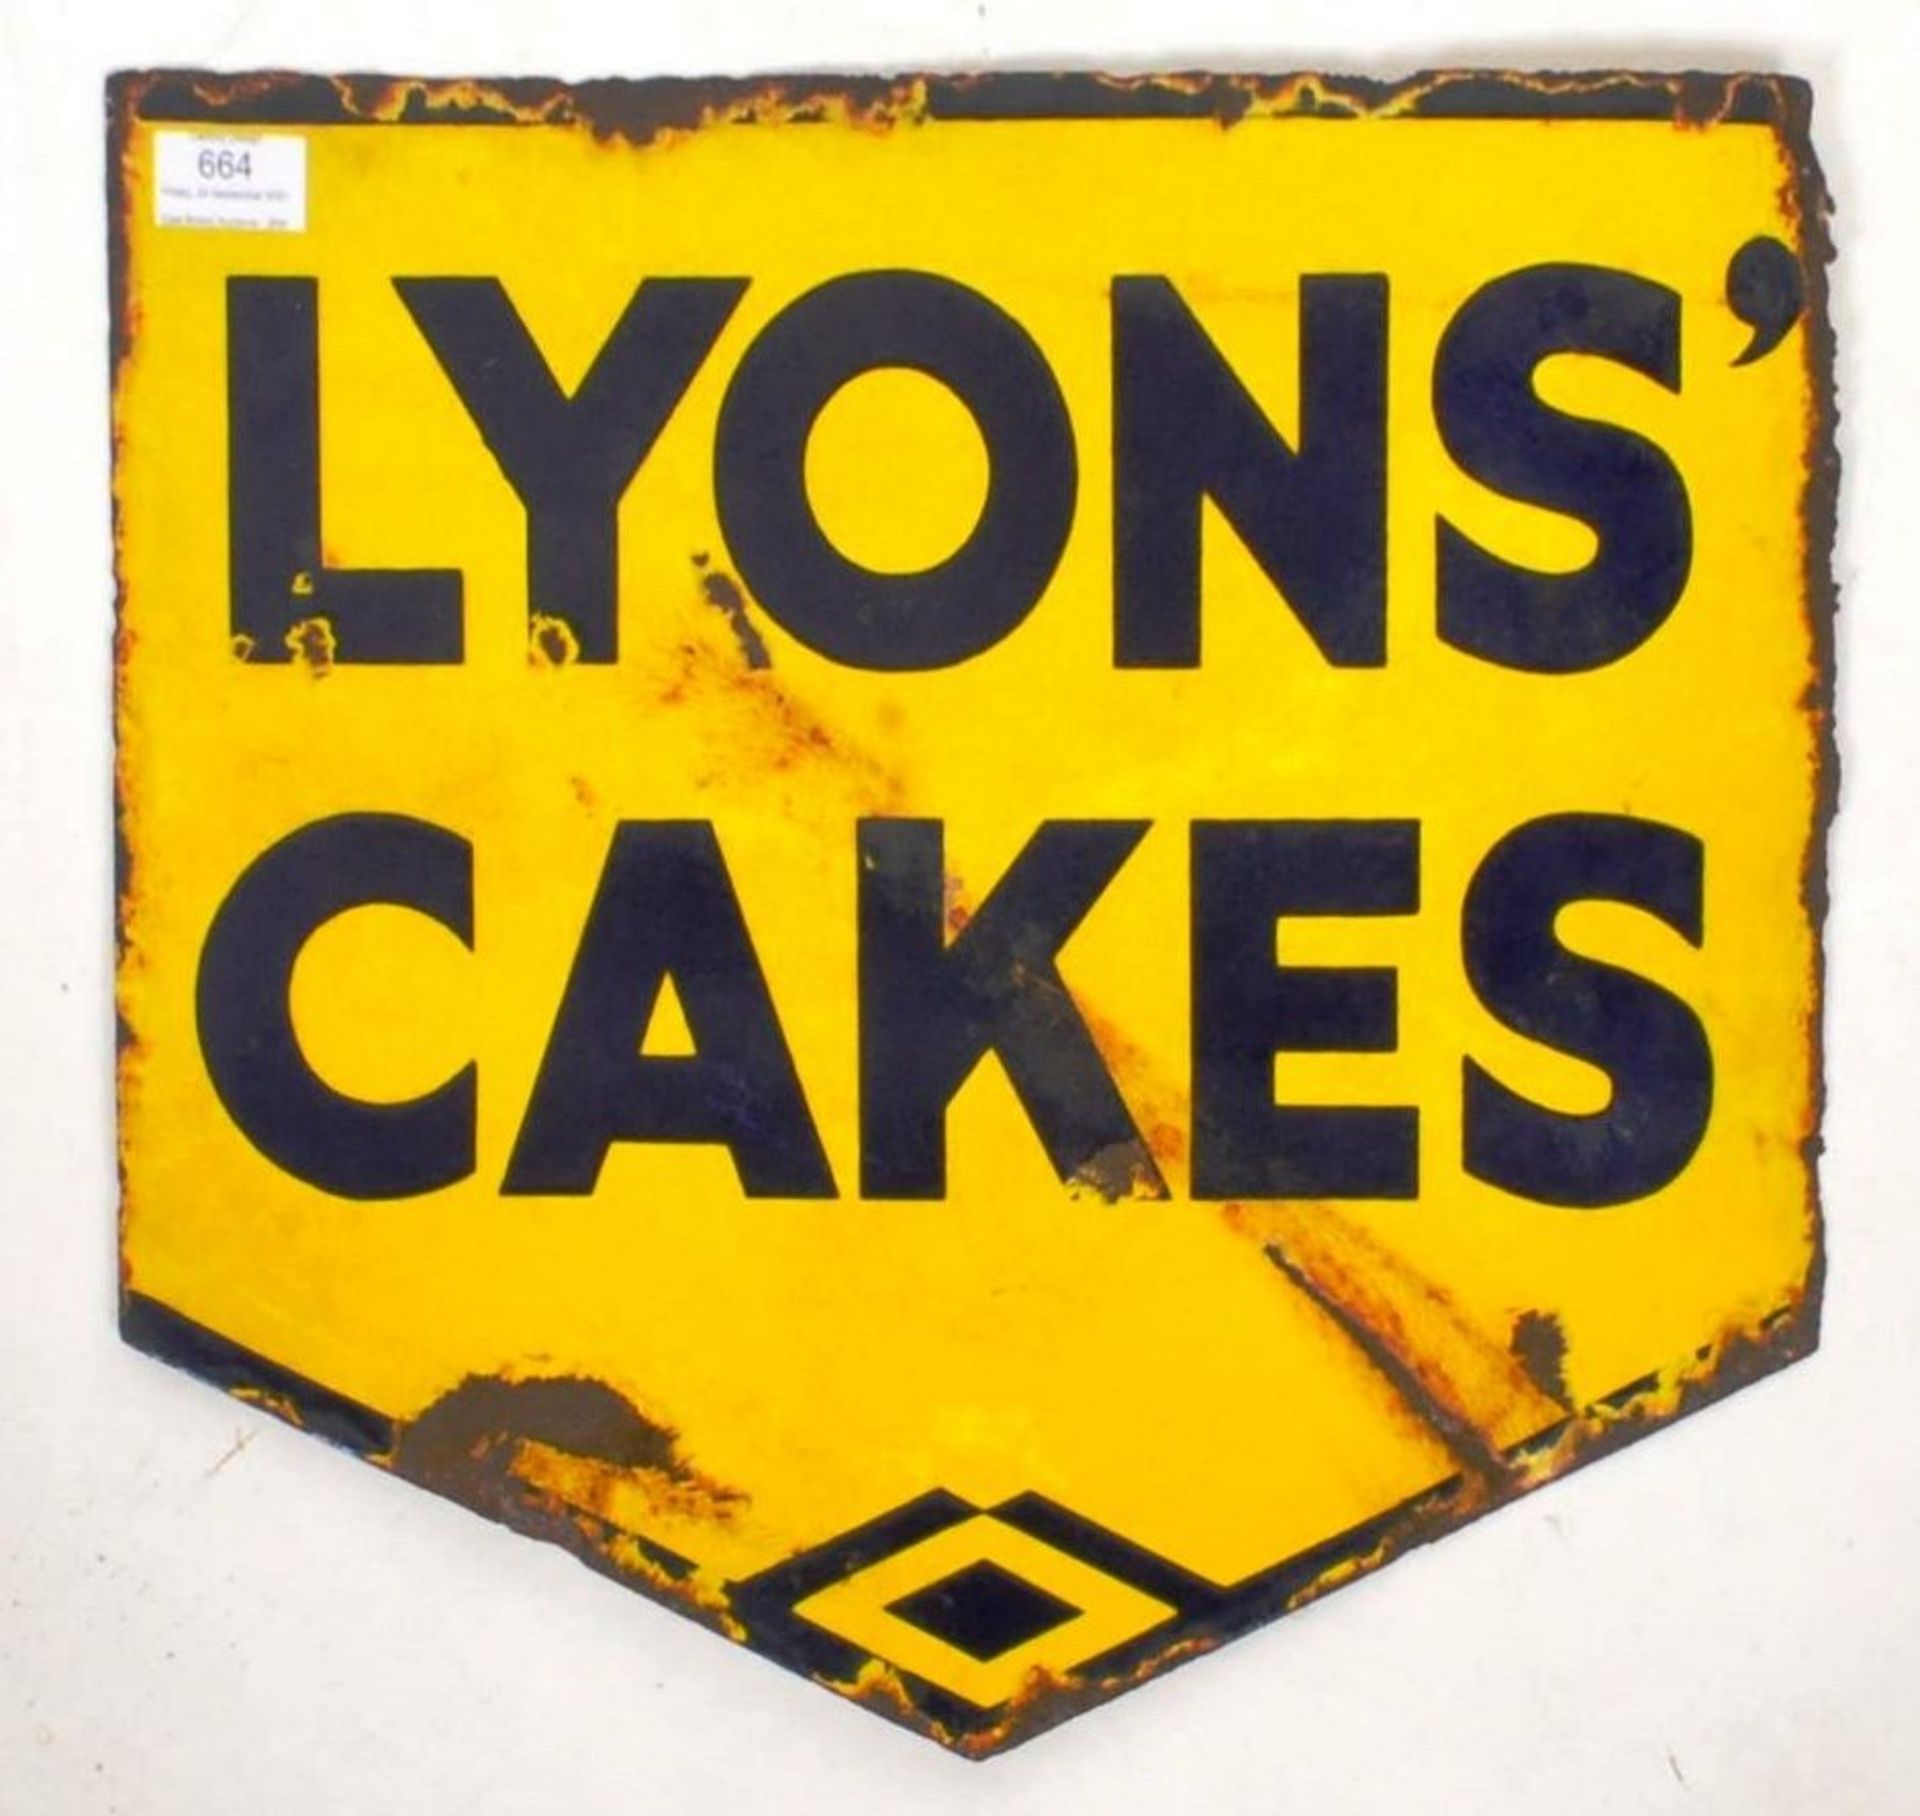 LYONS CAKES - MID 20TH CENTURY DOUBLE SIDED ENAMEL SIGN